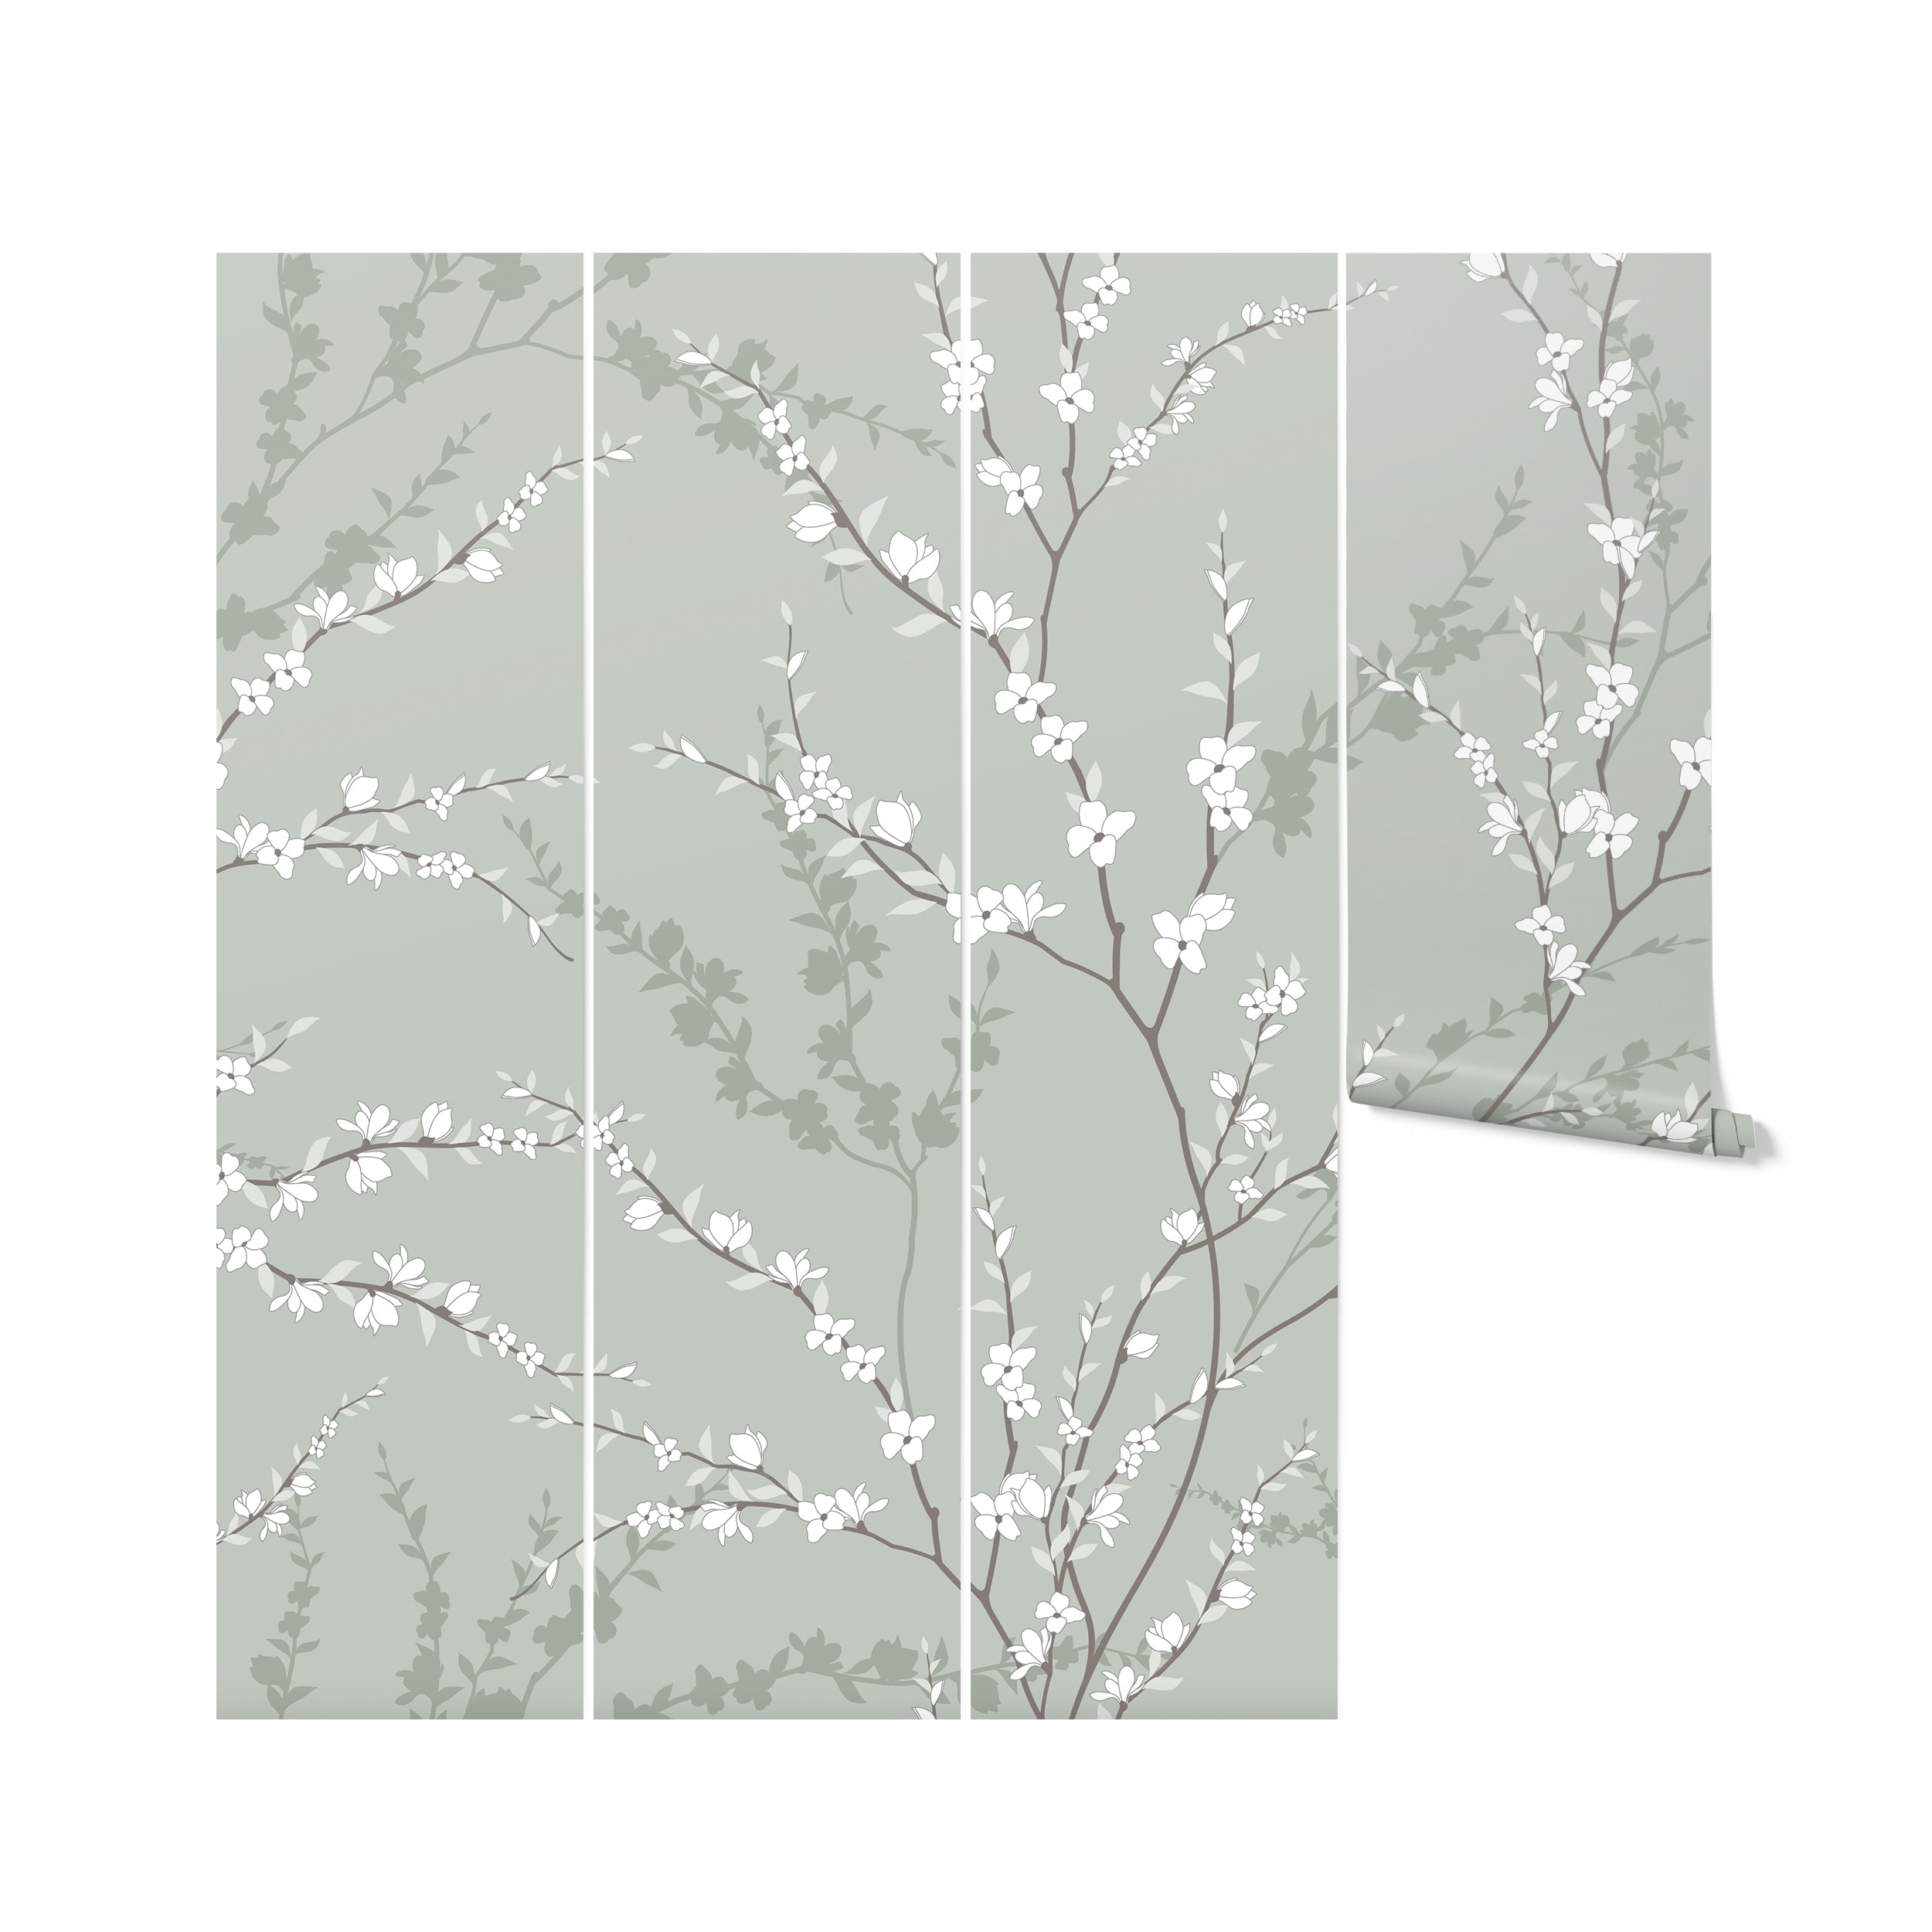 Three panels of the Enchanted Blossoms Wallpaper displayed vertically. Each panel consistently portrays the pattern of branches and white blossoms, maintaining the wallpaper's tranquil and cohesive aesthetic across a larger area. This display highlights the wallpaper's potential to transform any room into a charming, nature-inspired sanctuary.